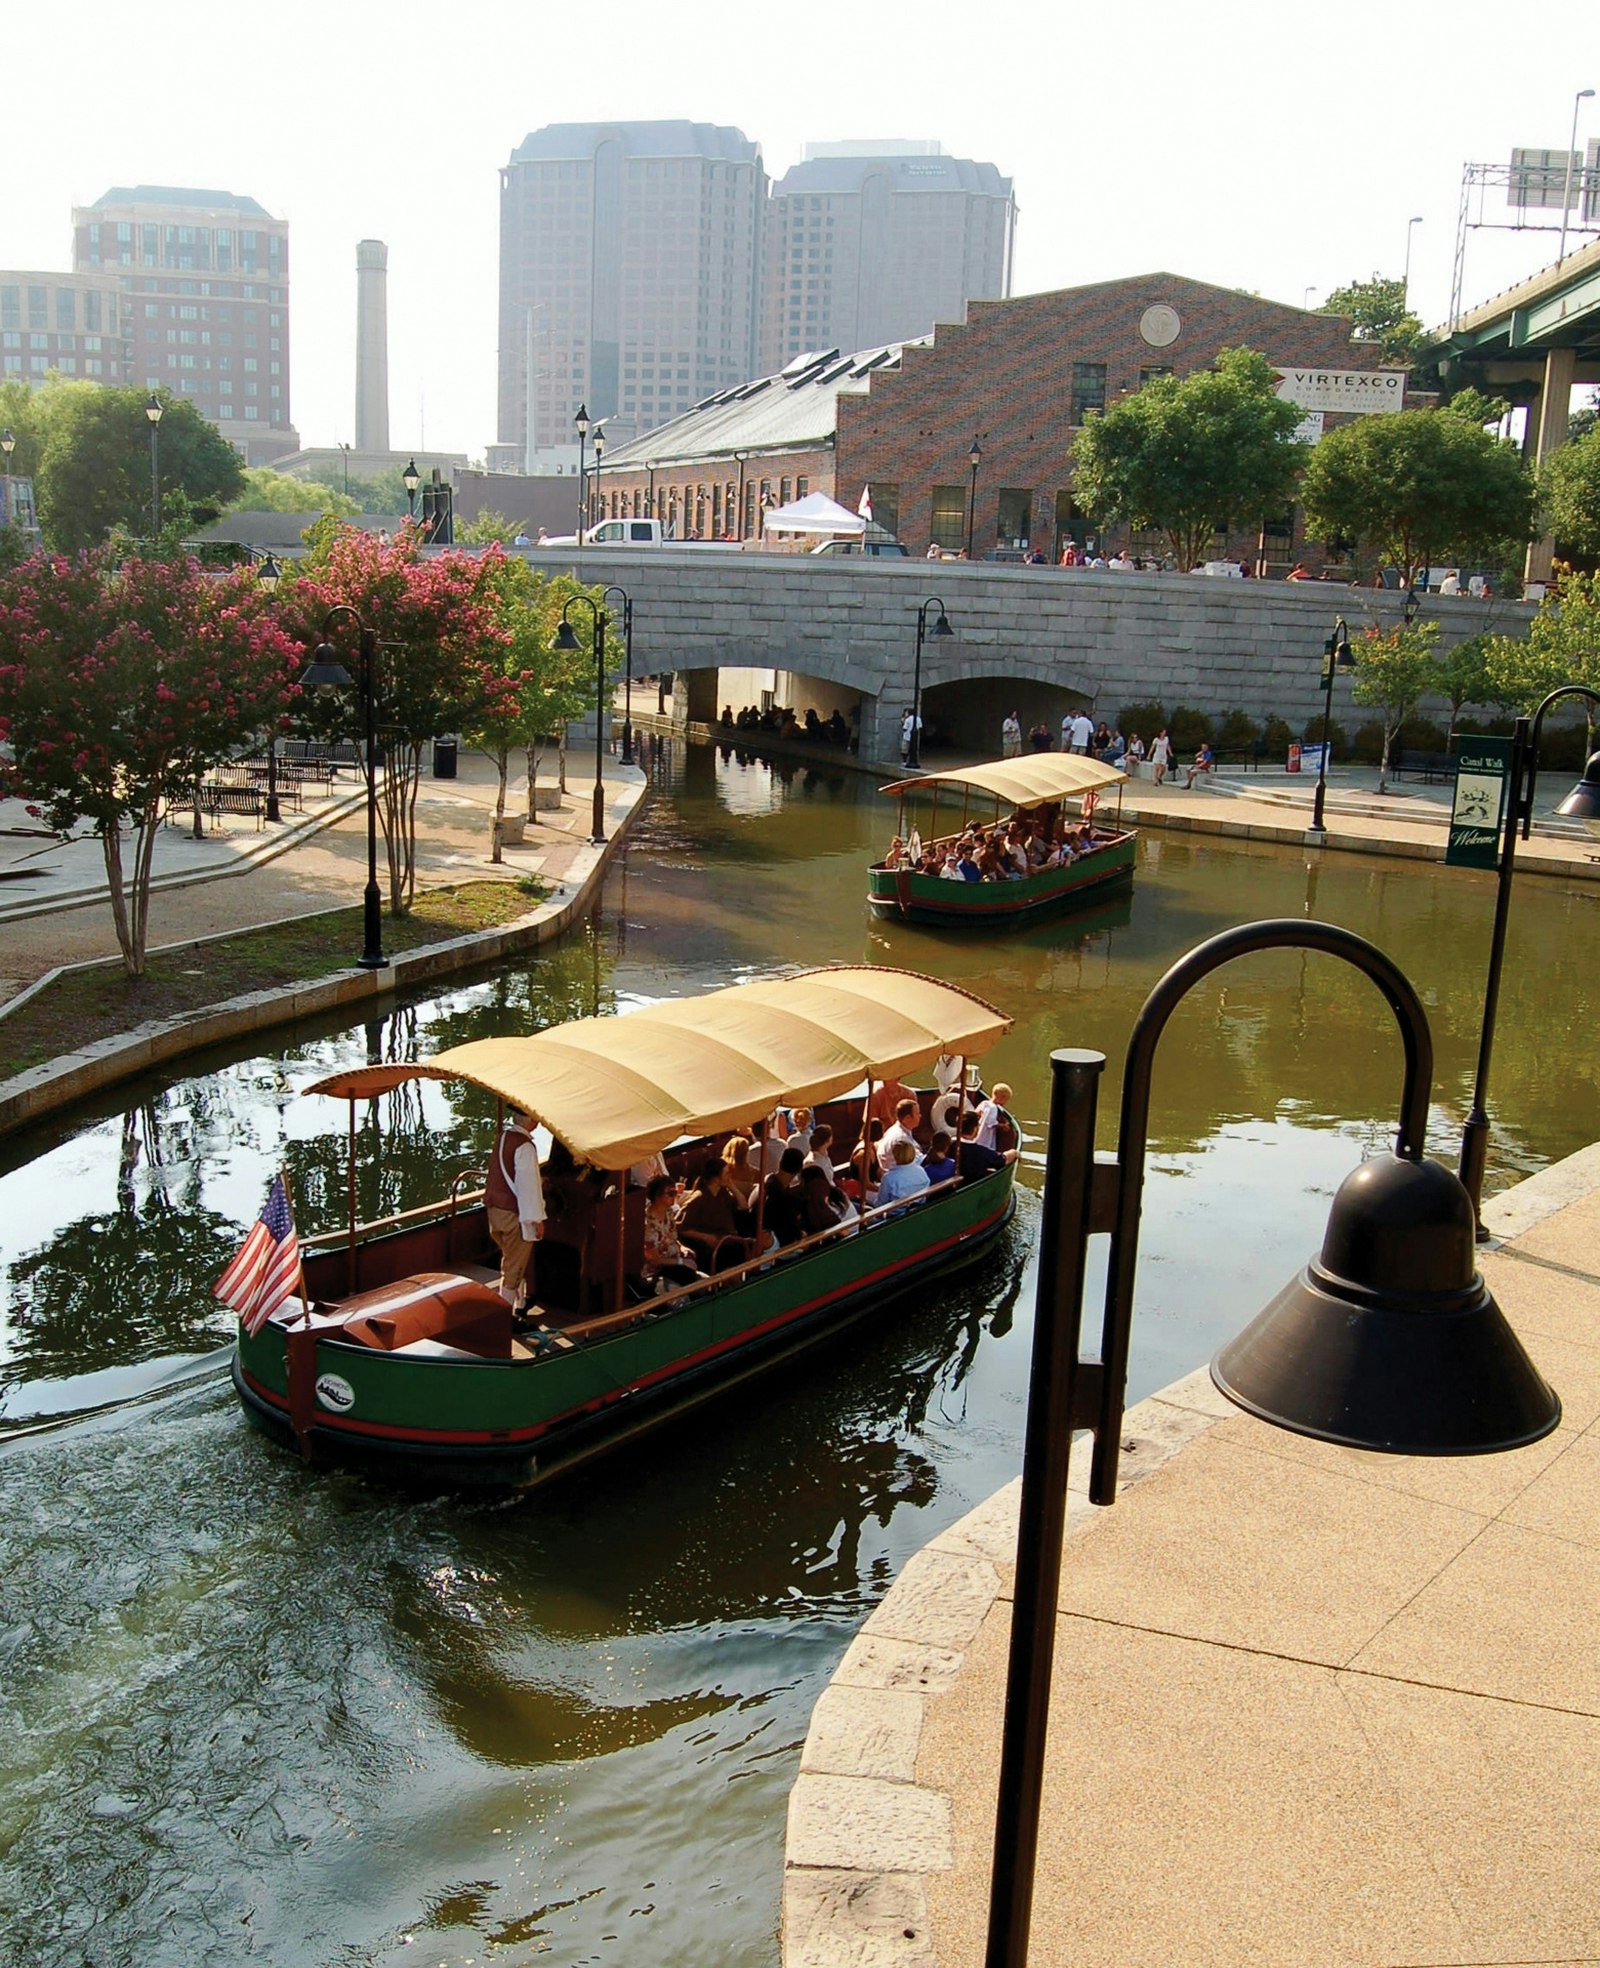 boats travel down the canal in Richmond, Virginia